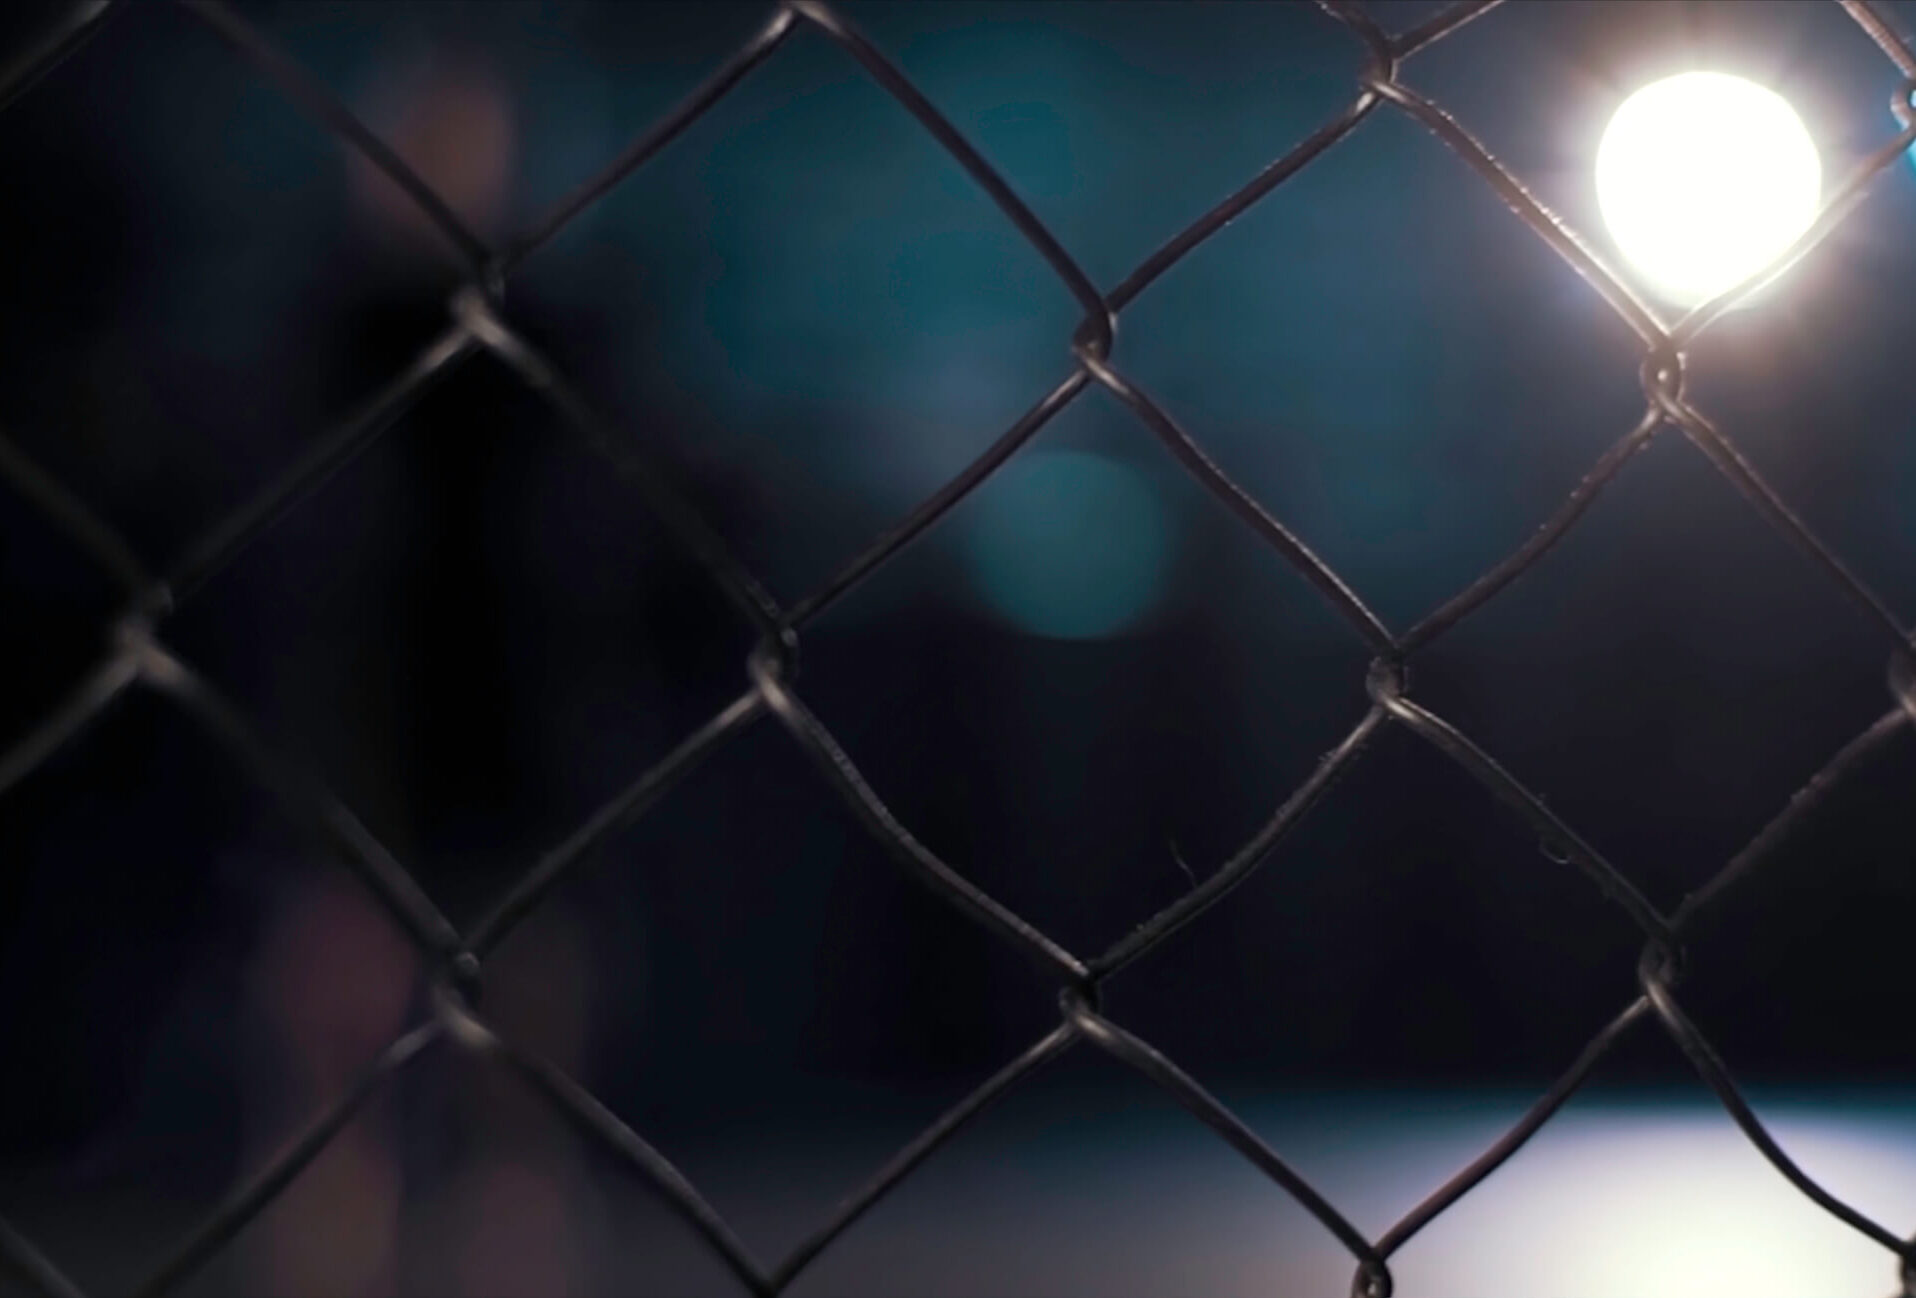 Chain link fence looking into a fighting ring